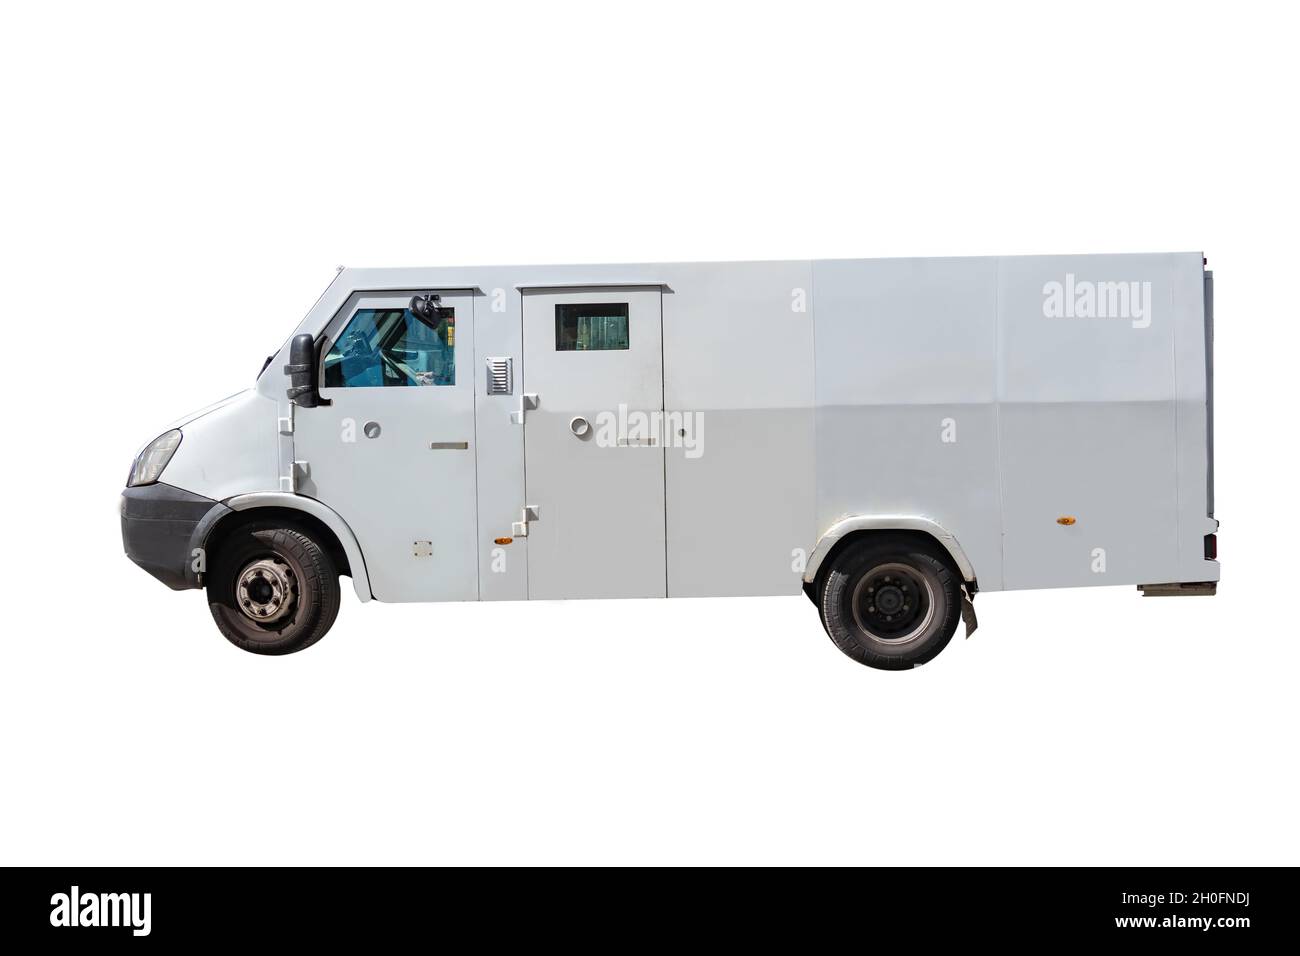 Money transport safety armored truck isolated on white background Stock Photo